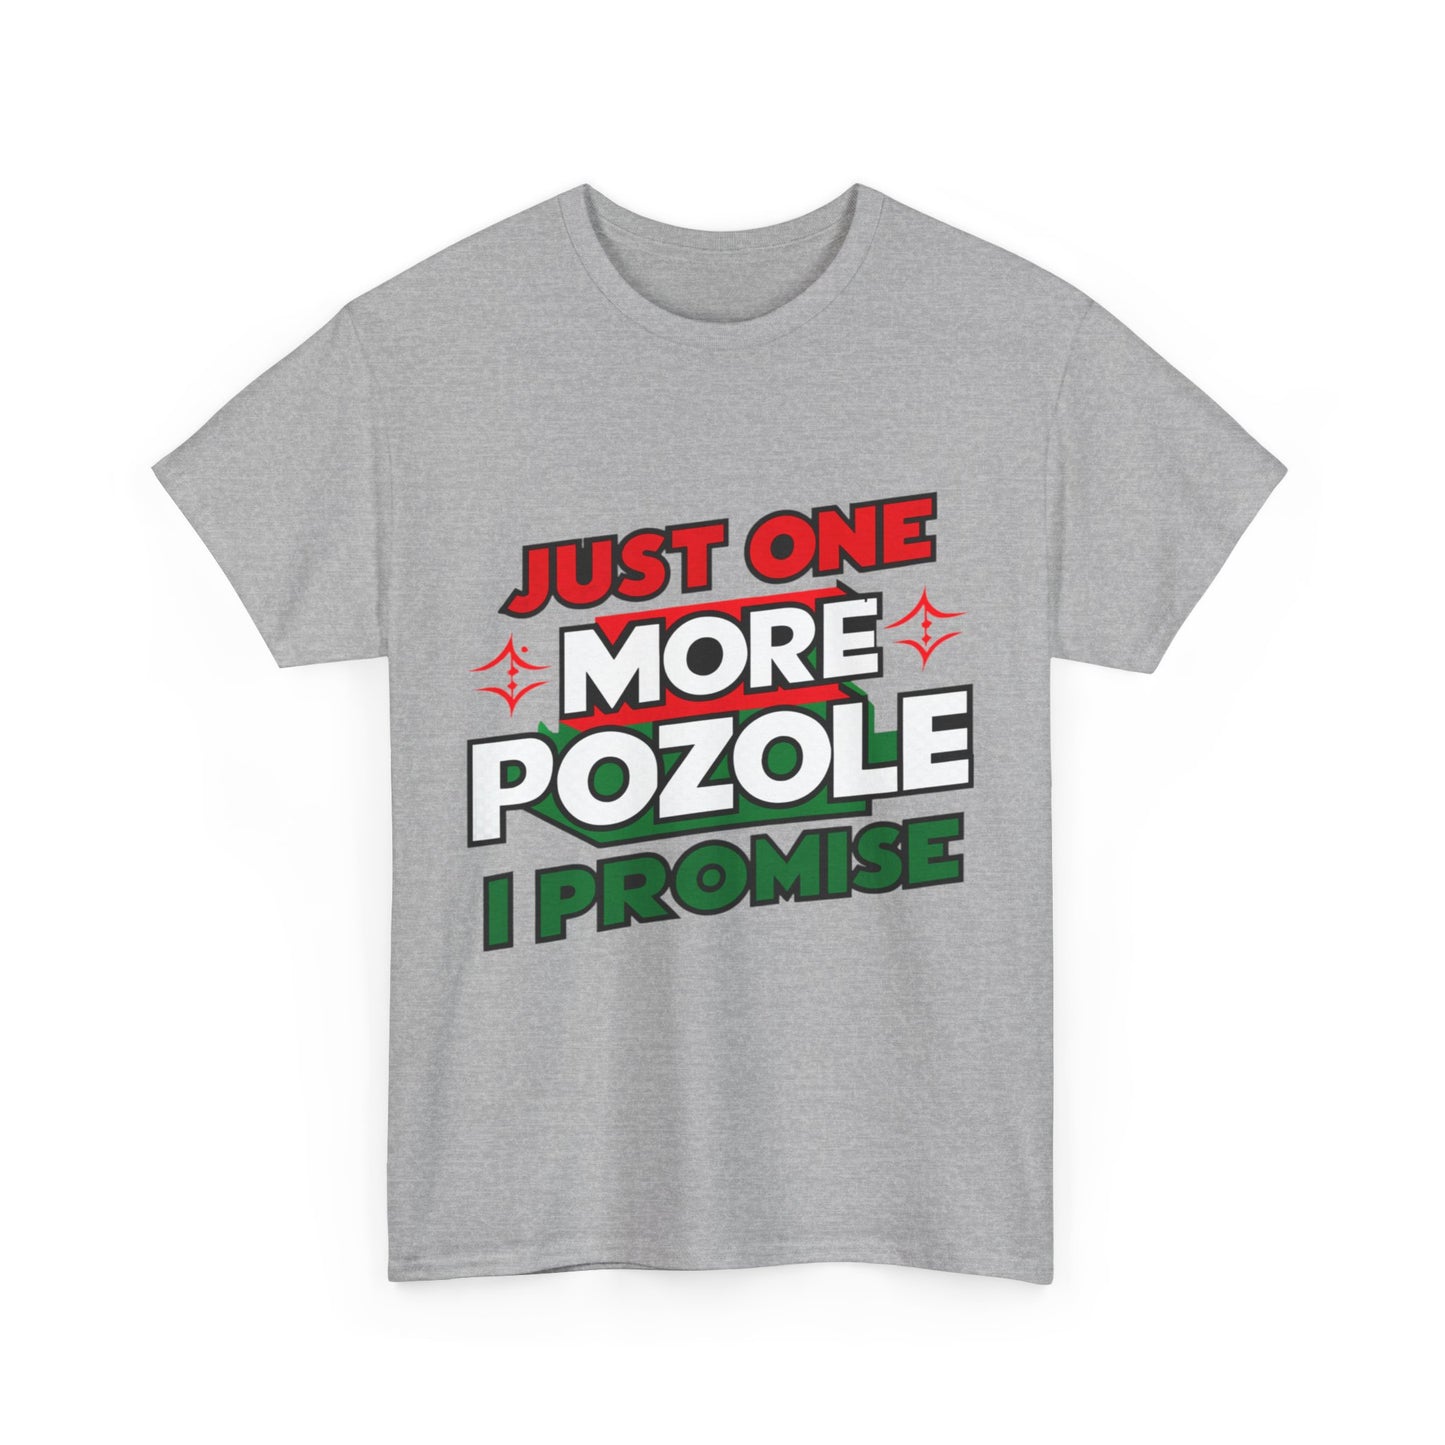 Just One More Pozole I Promise Mexican Food Graphic Unisex Heavy Cotton Tee Cotton Funny Humorous Graphic Soft Premium Unisex Men Women Sport Grey T-shirt Birthday Gift-39